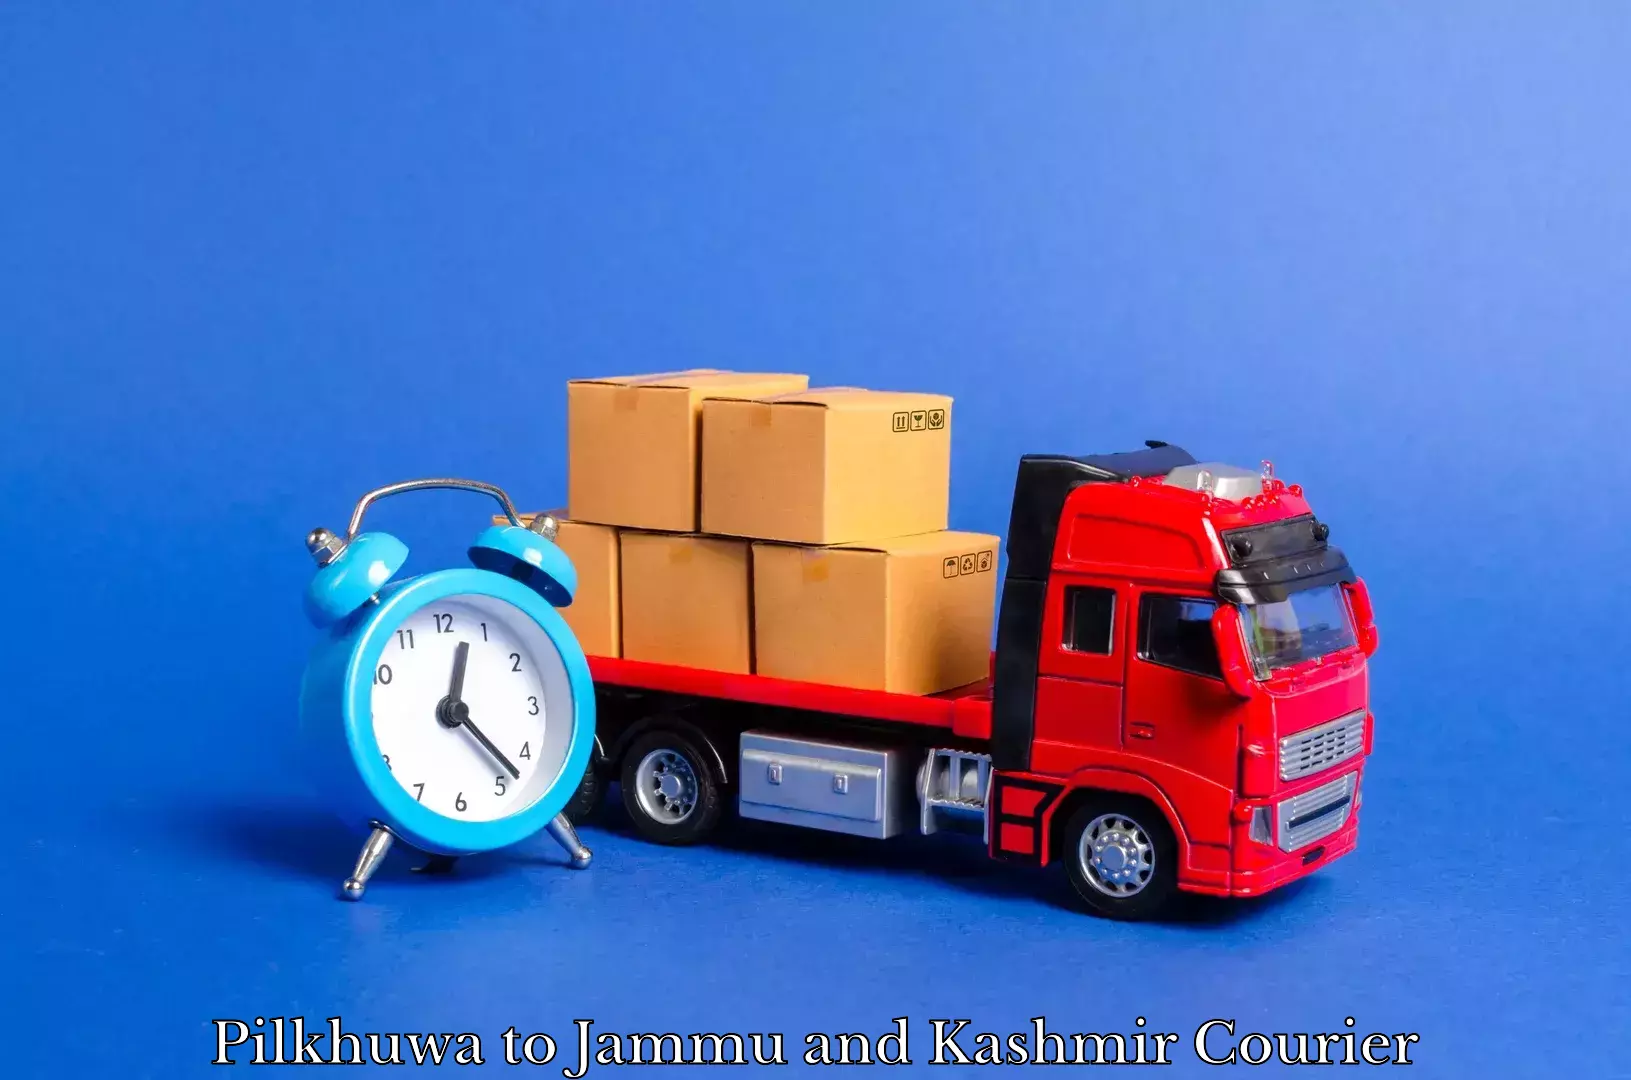 Furniture movers and packers in Pilkhuwa to Srinagar Kashmir